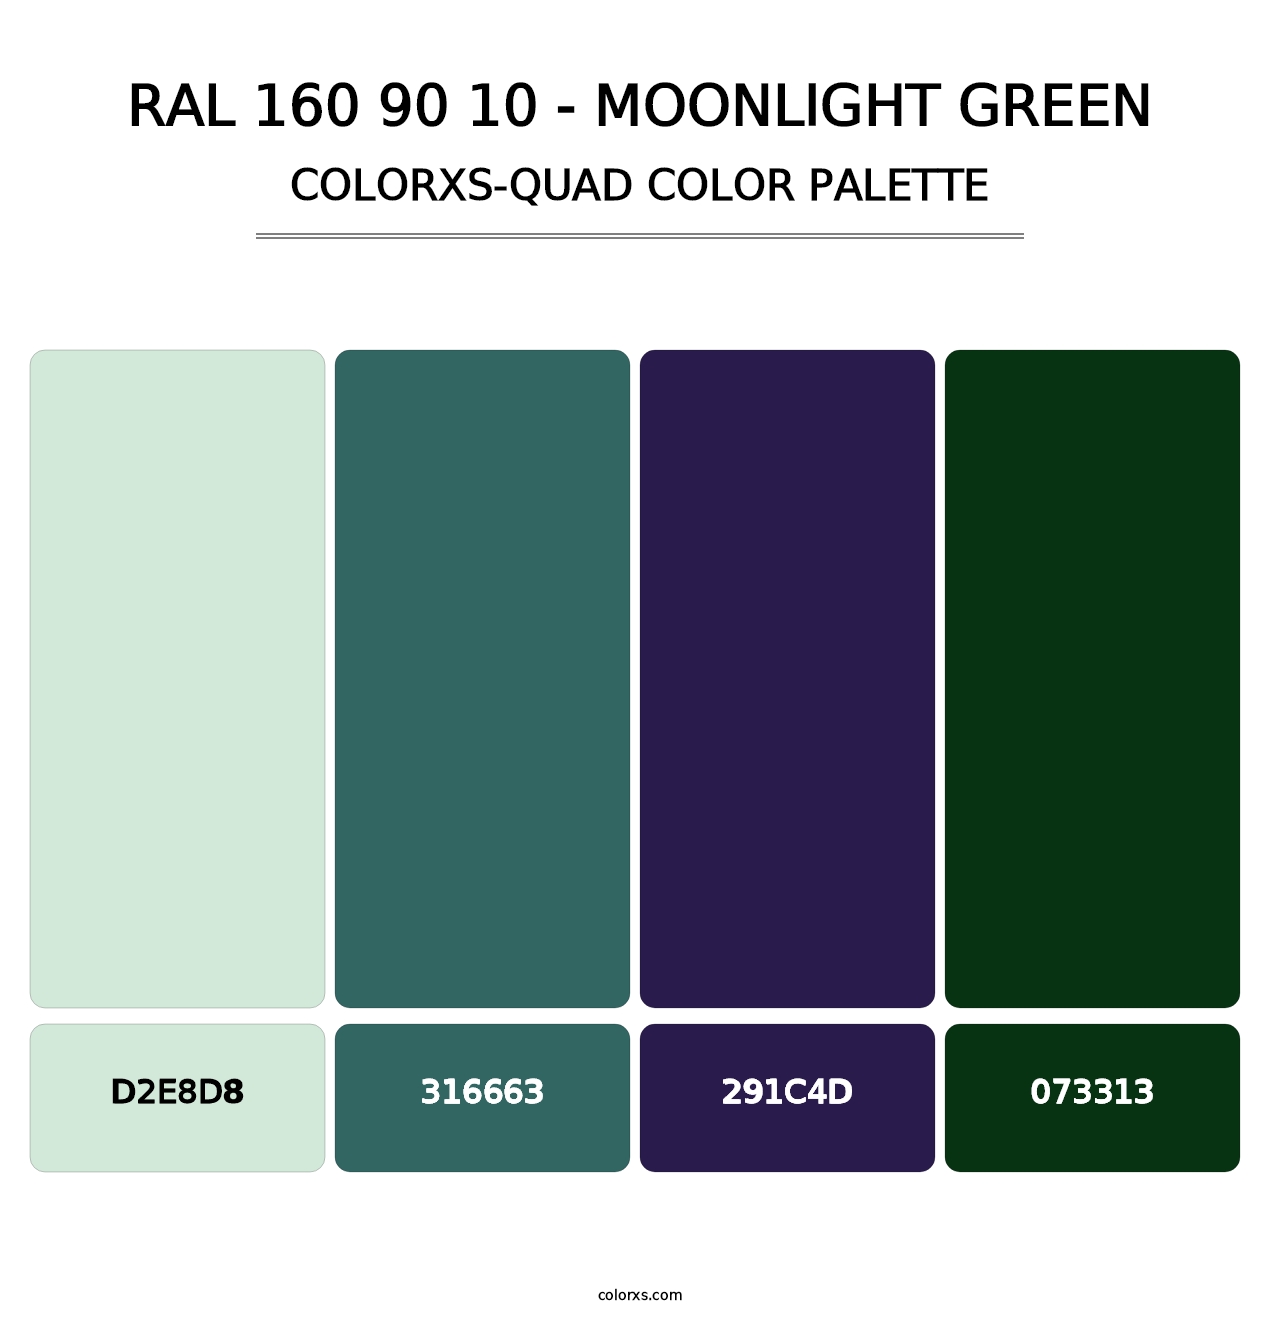 RAL 160 90 10 - Moonlight Green - Colorxs Quad Palette